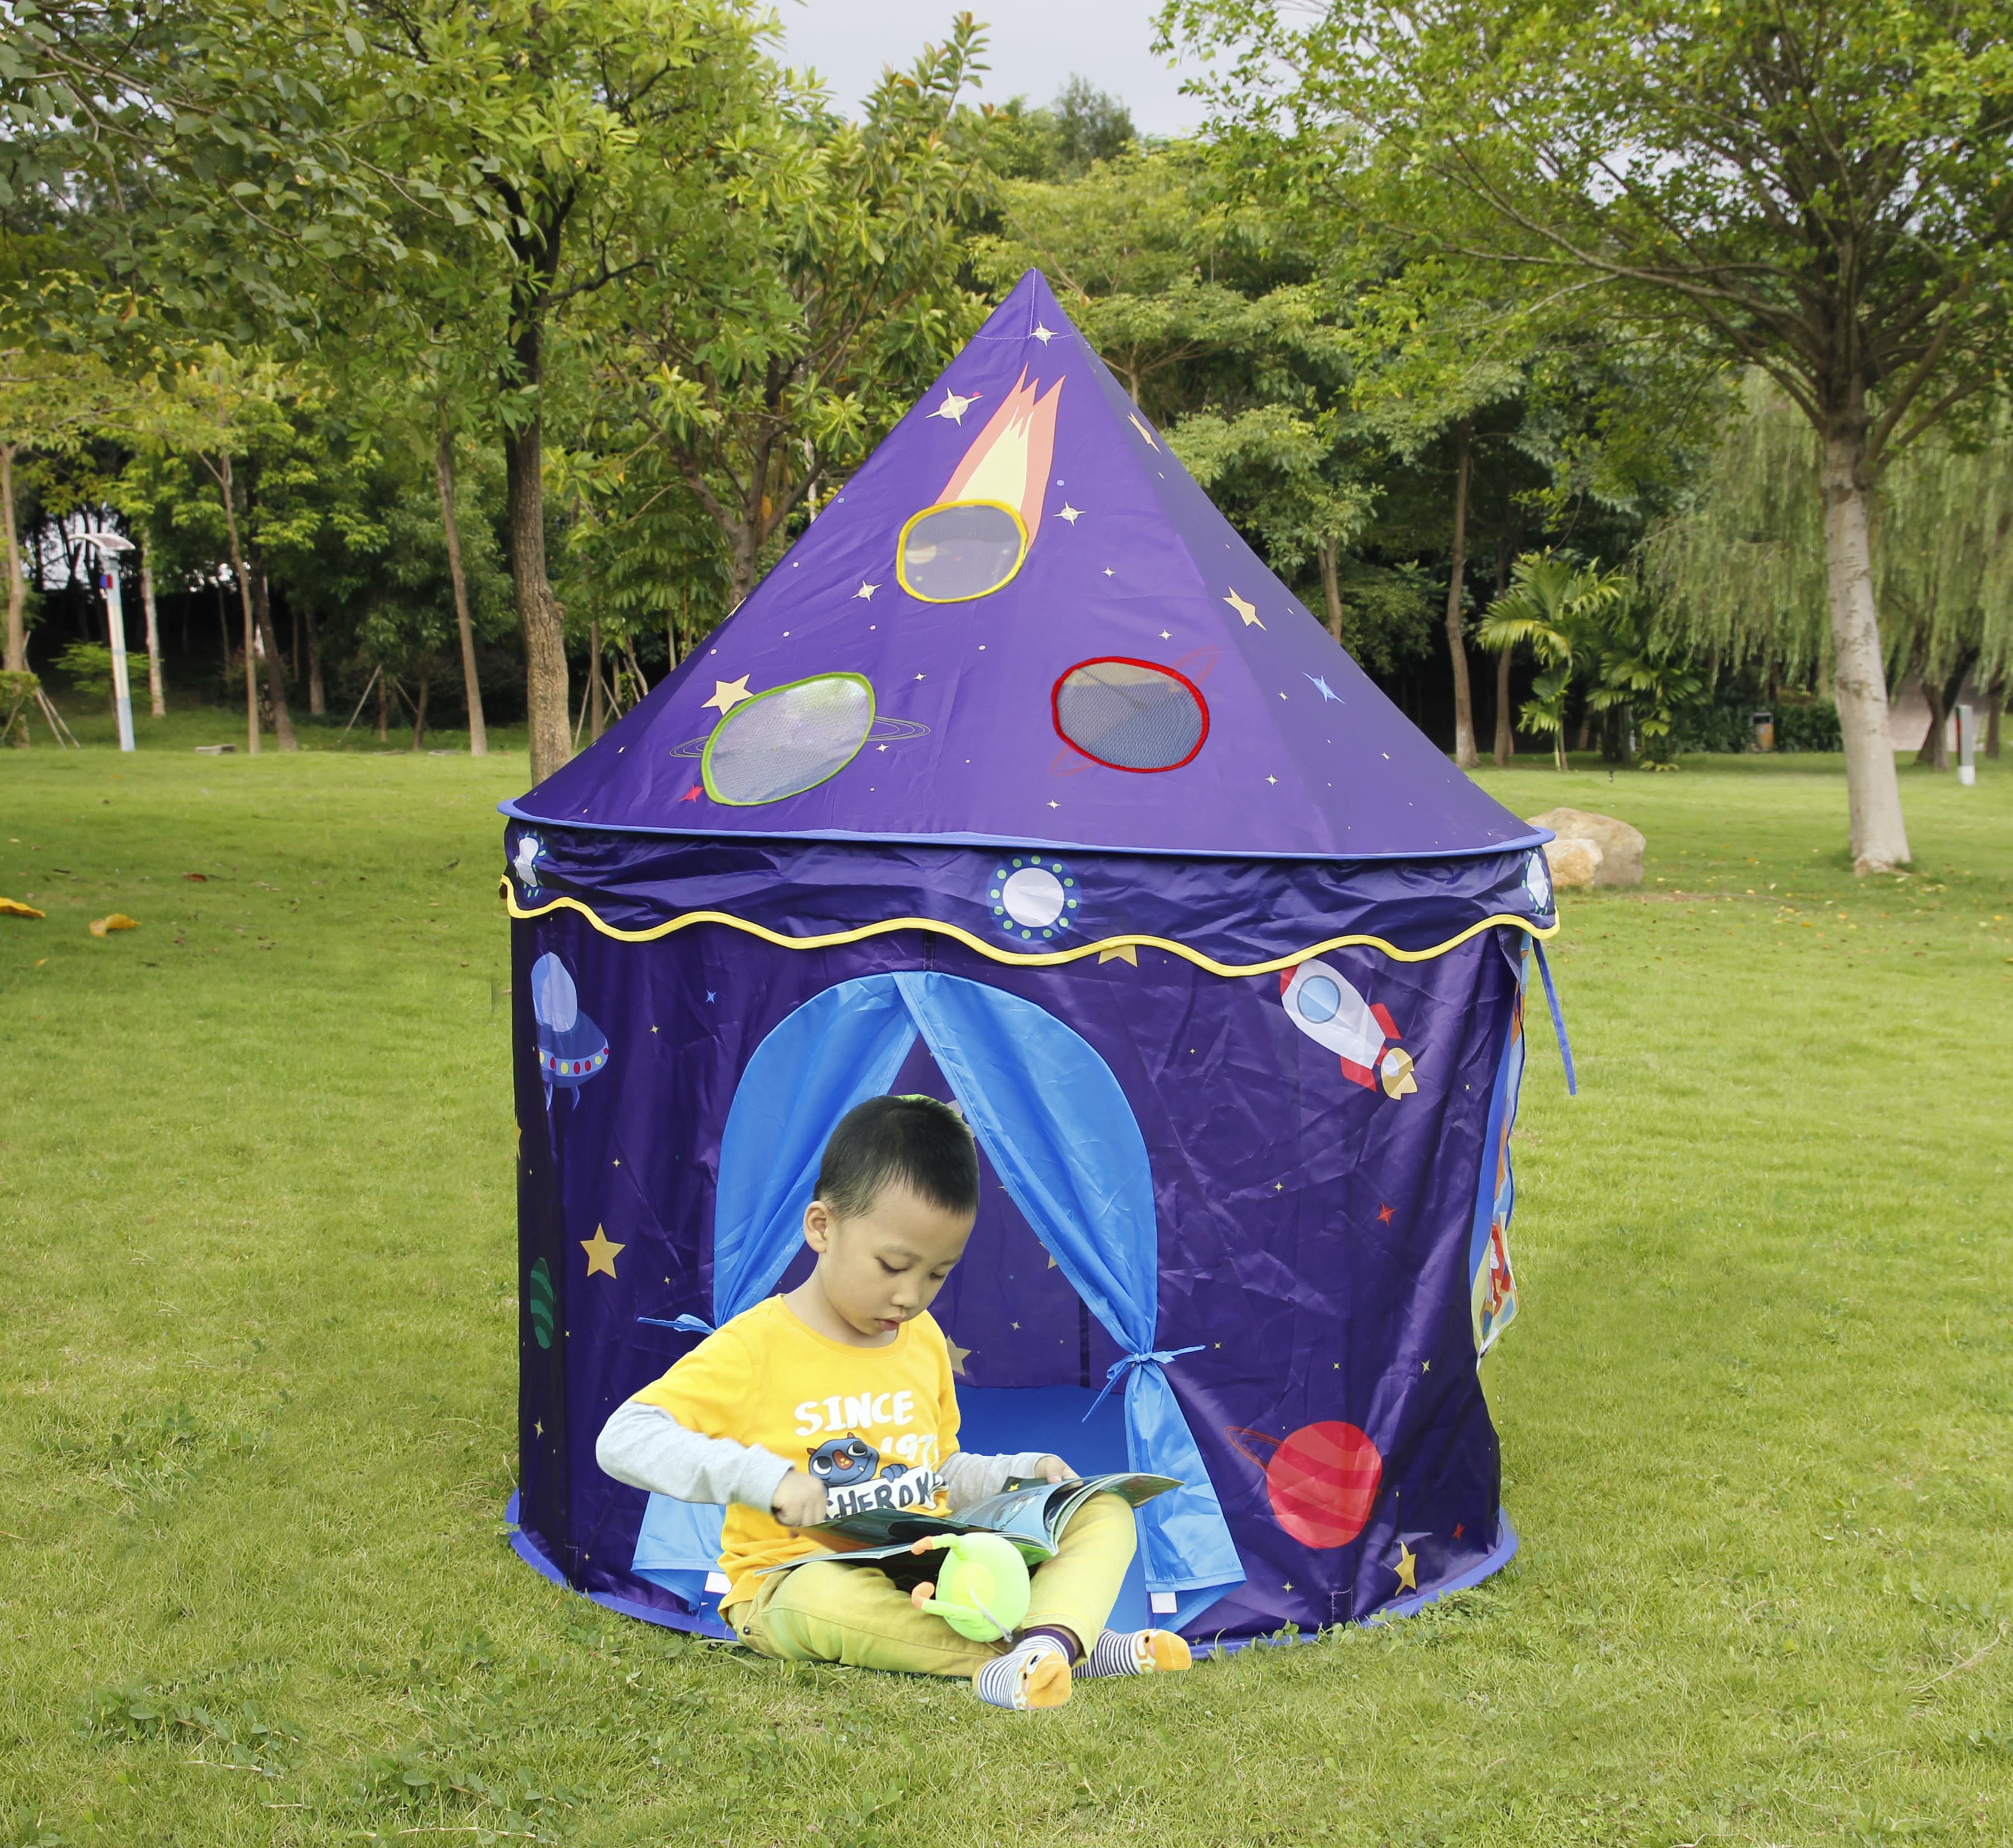 Kids Tent with Pop-Up Playhouse for Children Toddler to Birthday Gift Play Tent for Boys Girls  